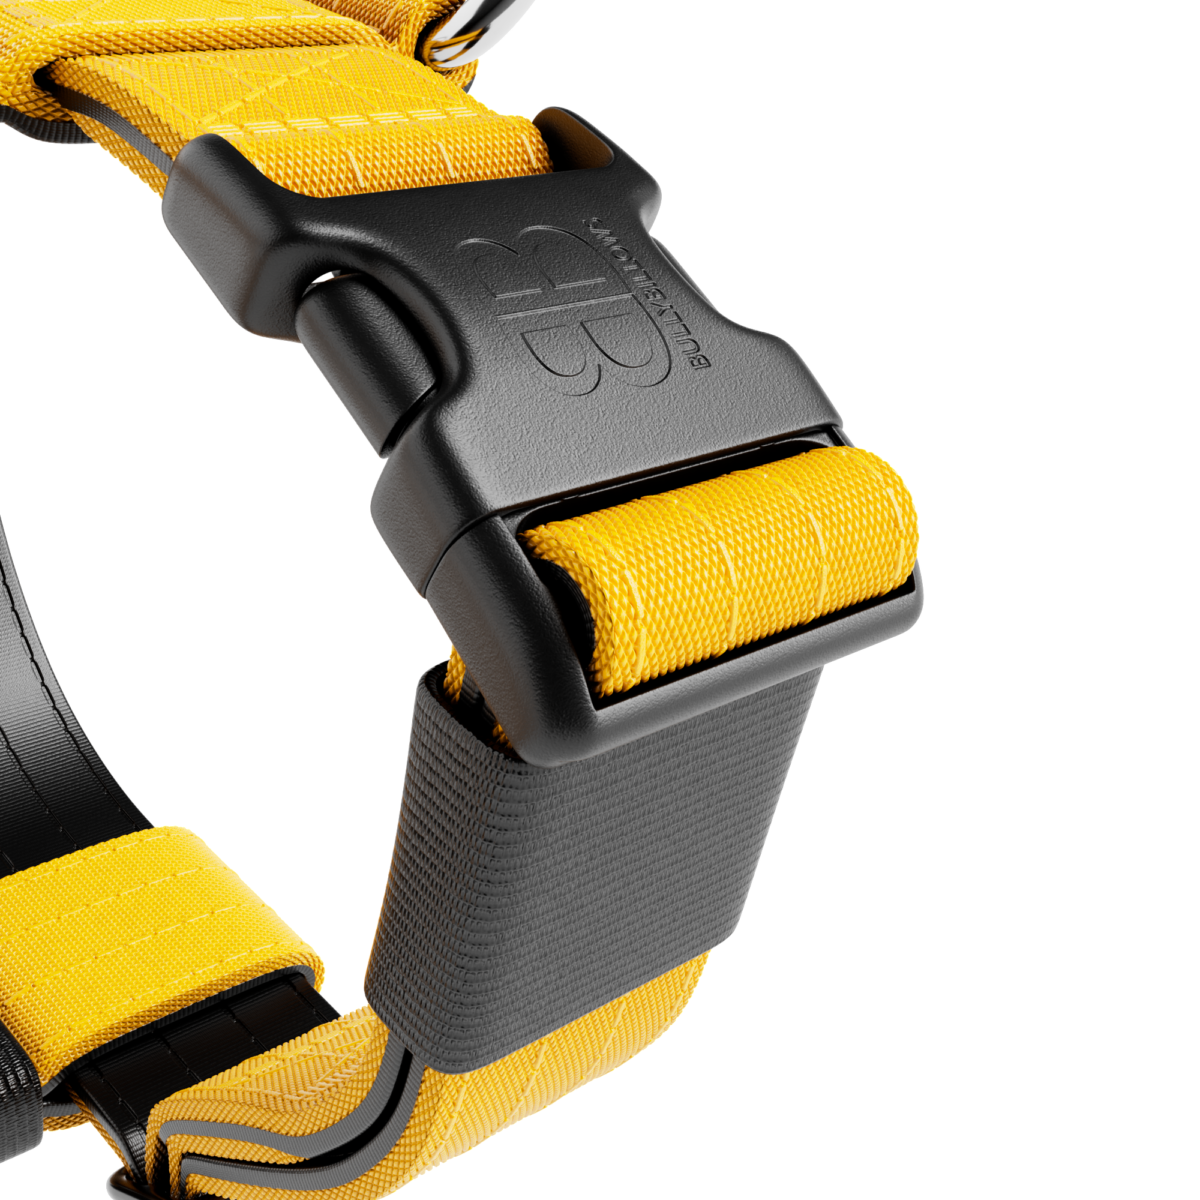 TRI-Harness® | Anti-Pull, Adjustable & Durable - Dog Trainers Choice - Mustard Yellow v2.0